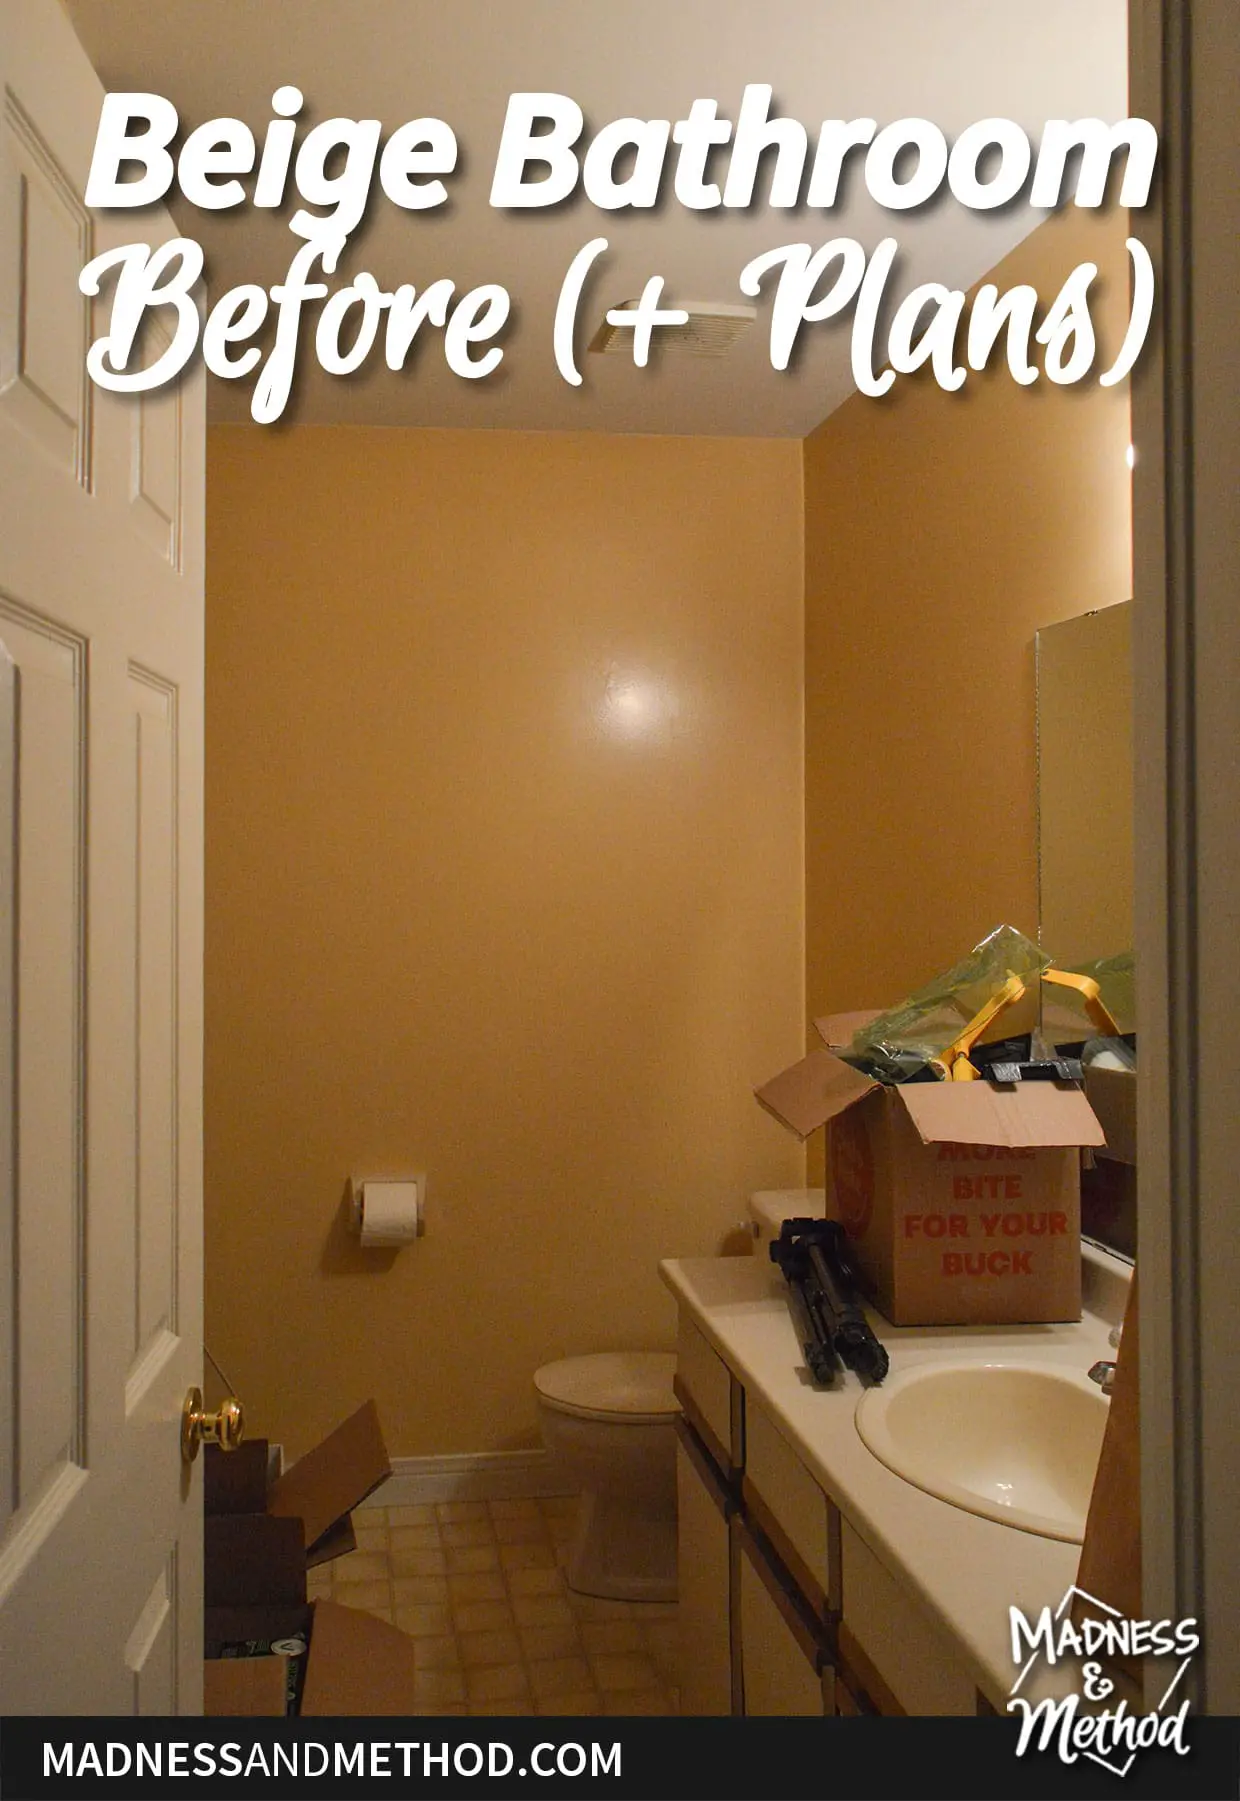 beige bathroom before and plans text